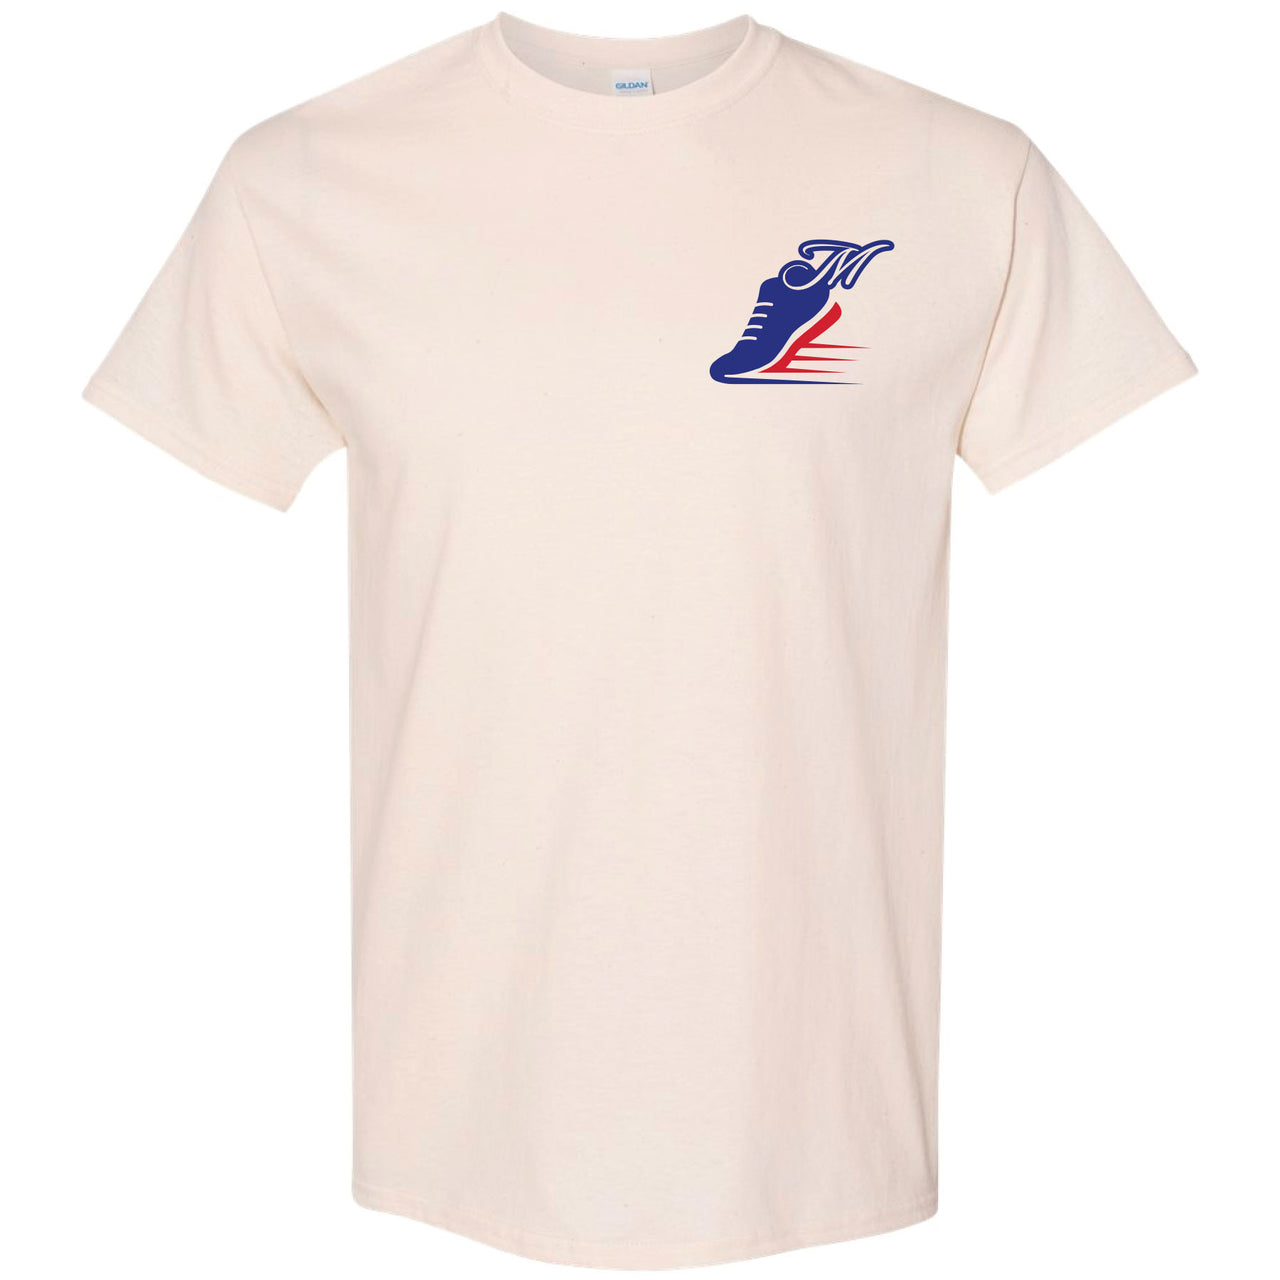 Michelob Winged Runner T-Shirt